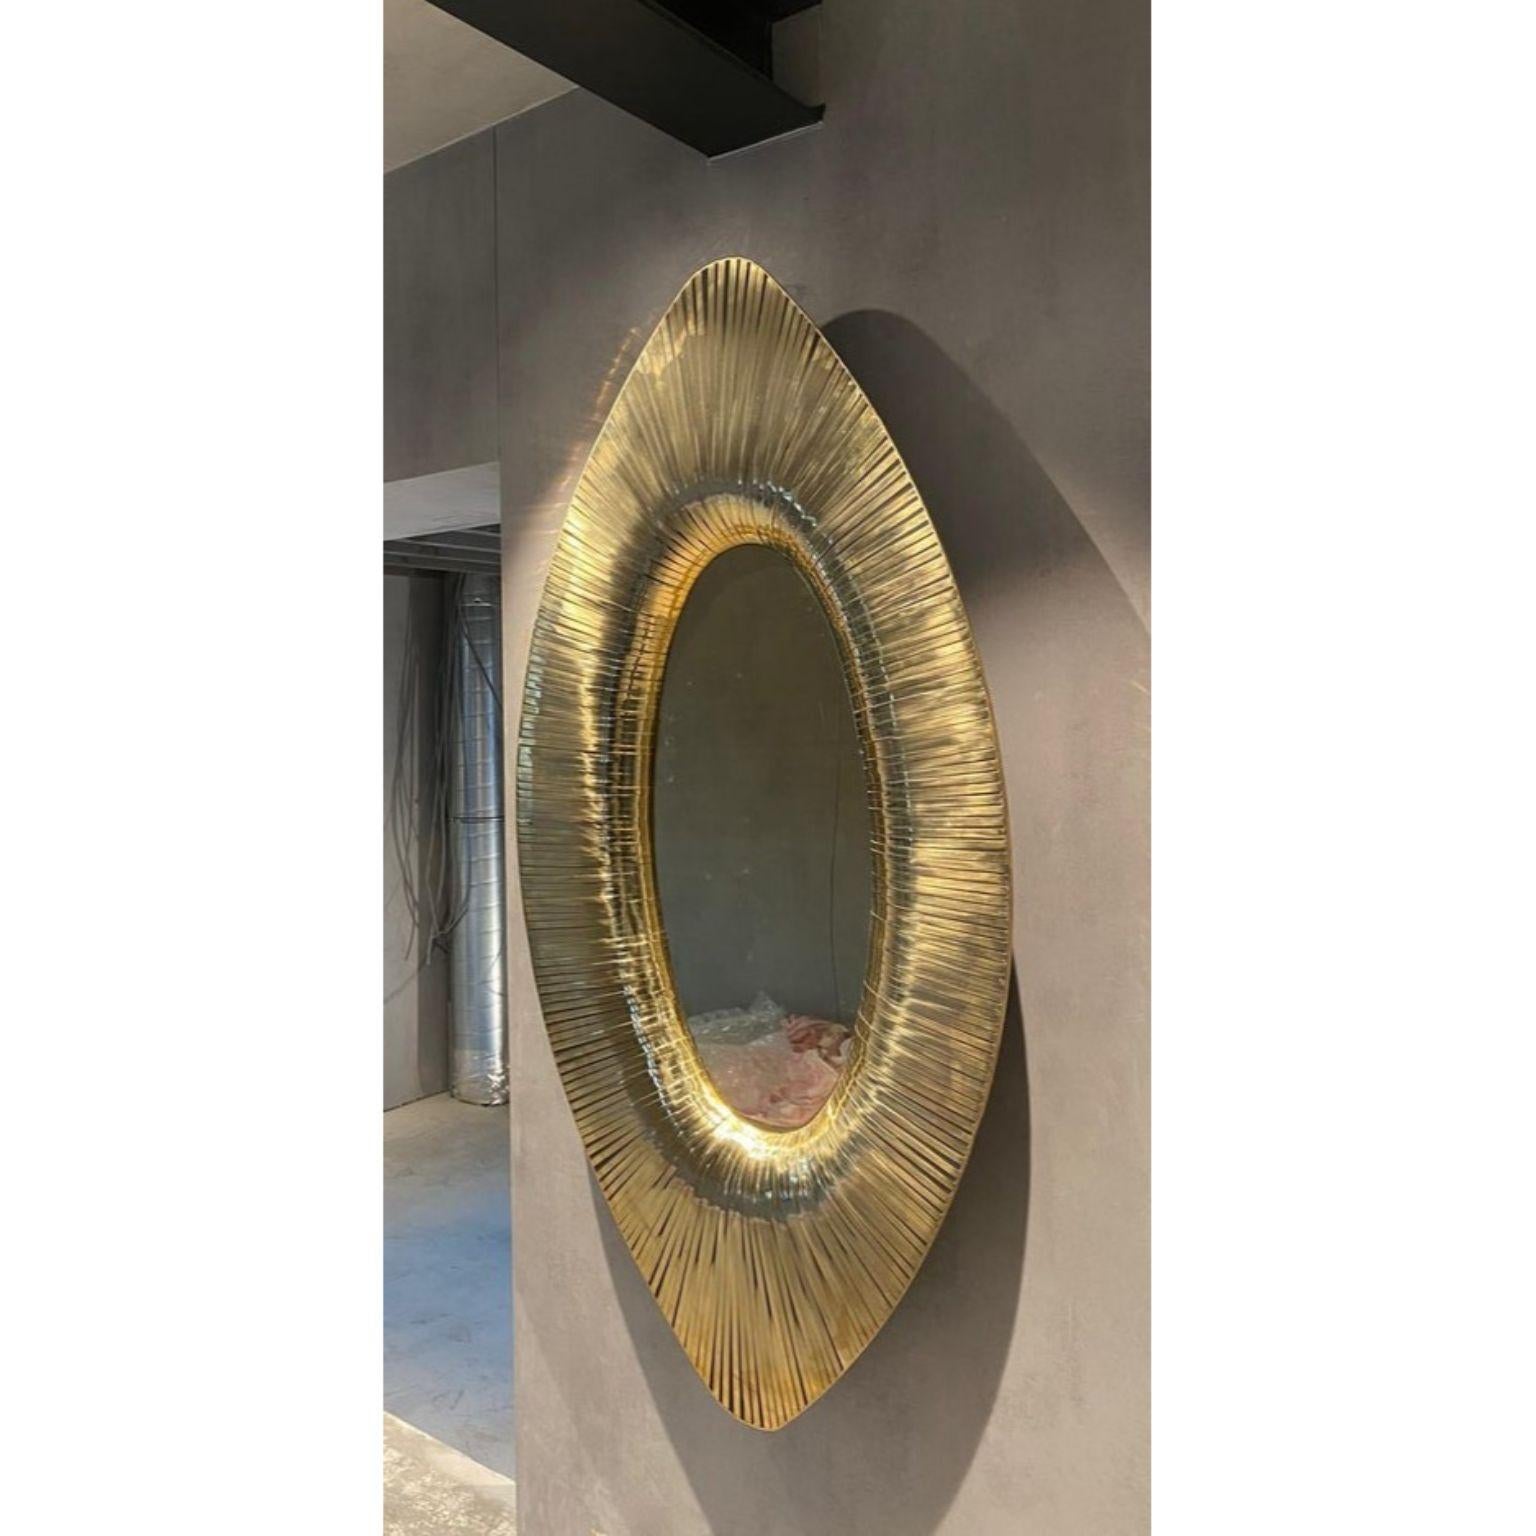 Vortex mirror sculpted by Yann Dessauvages
Signed
Dimensions: D 160 x H 80 cm
Materials: Brass and resin

Yann Dessauvages °June 1989 born in Brussels is a Belgian autodidact artist-designer. As the child of a teacher and a metalworker, he grew